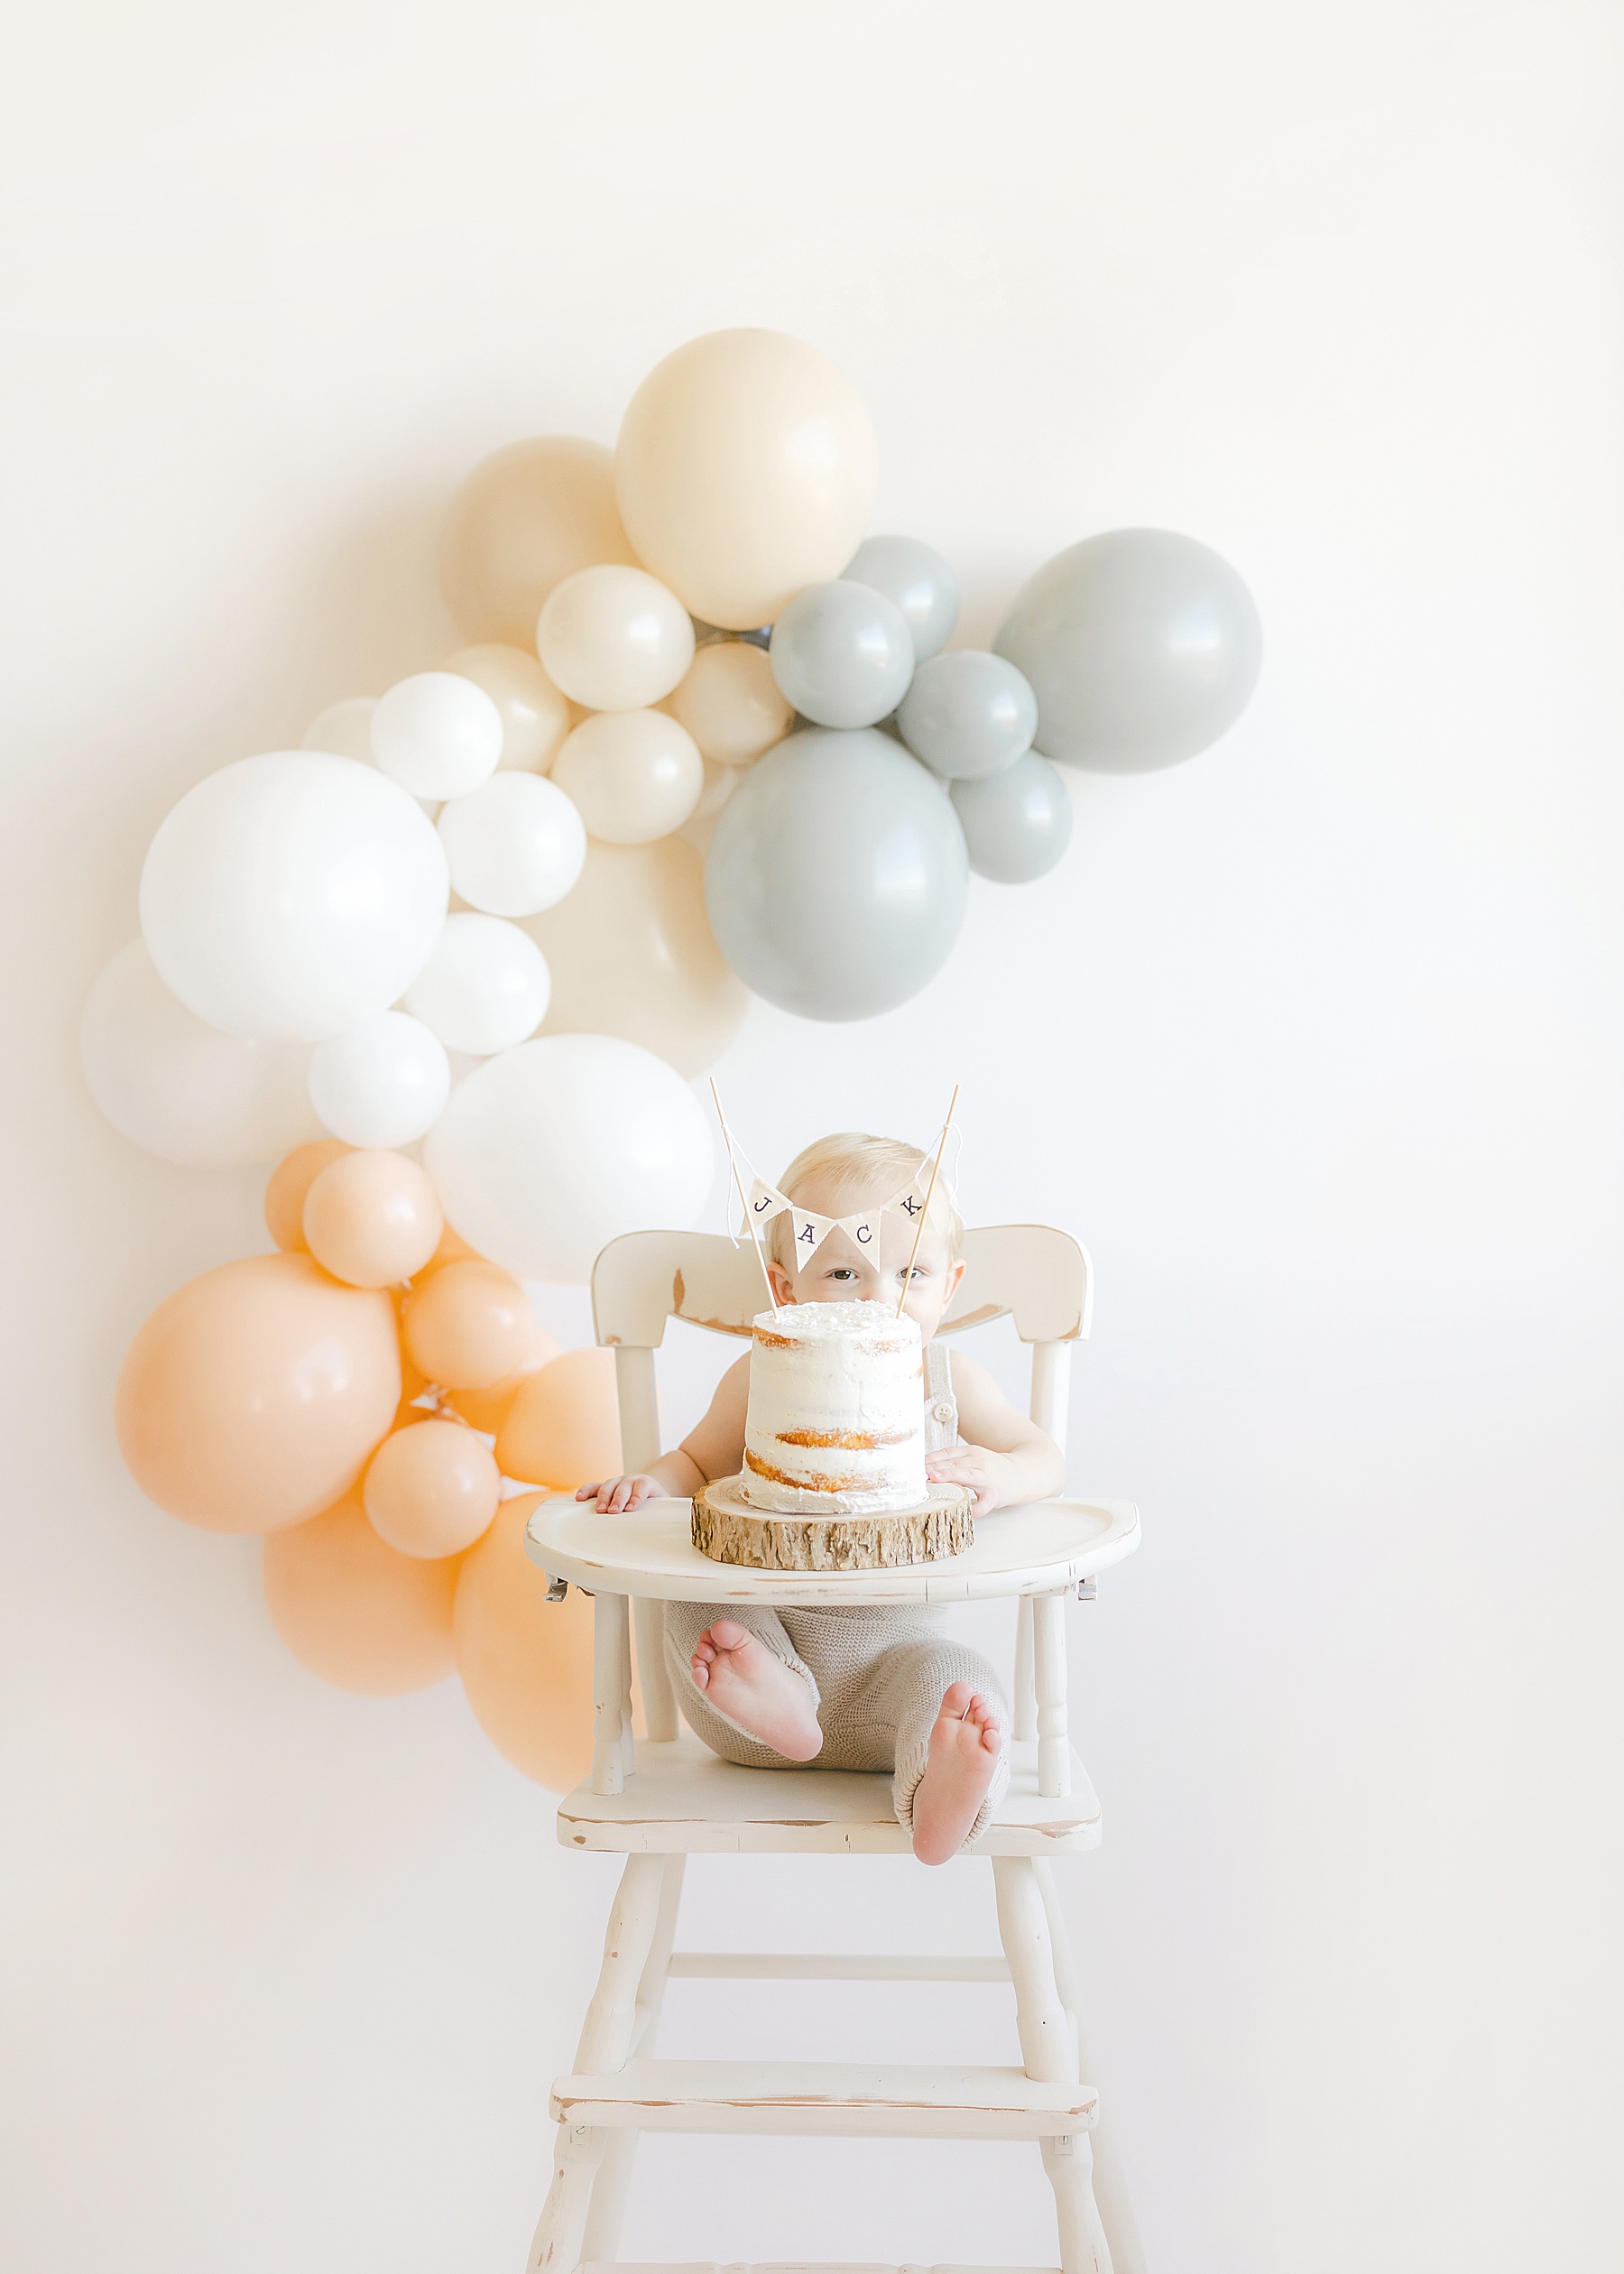 baby boy sitting in white high chair in front of white birthday cake and neutral balloons